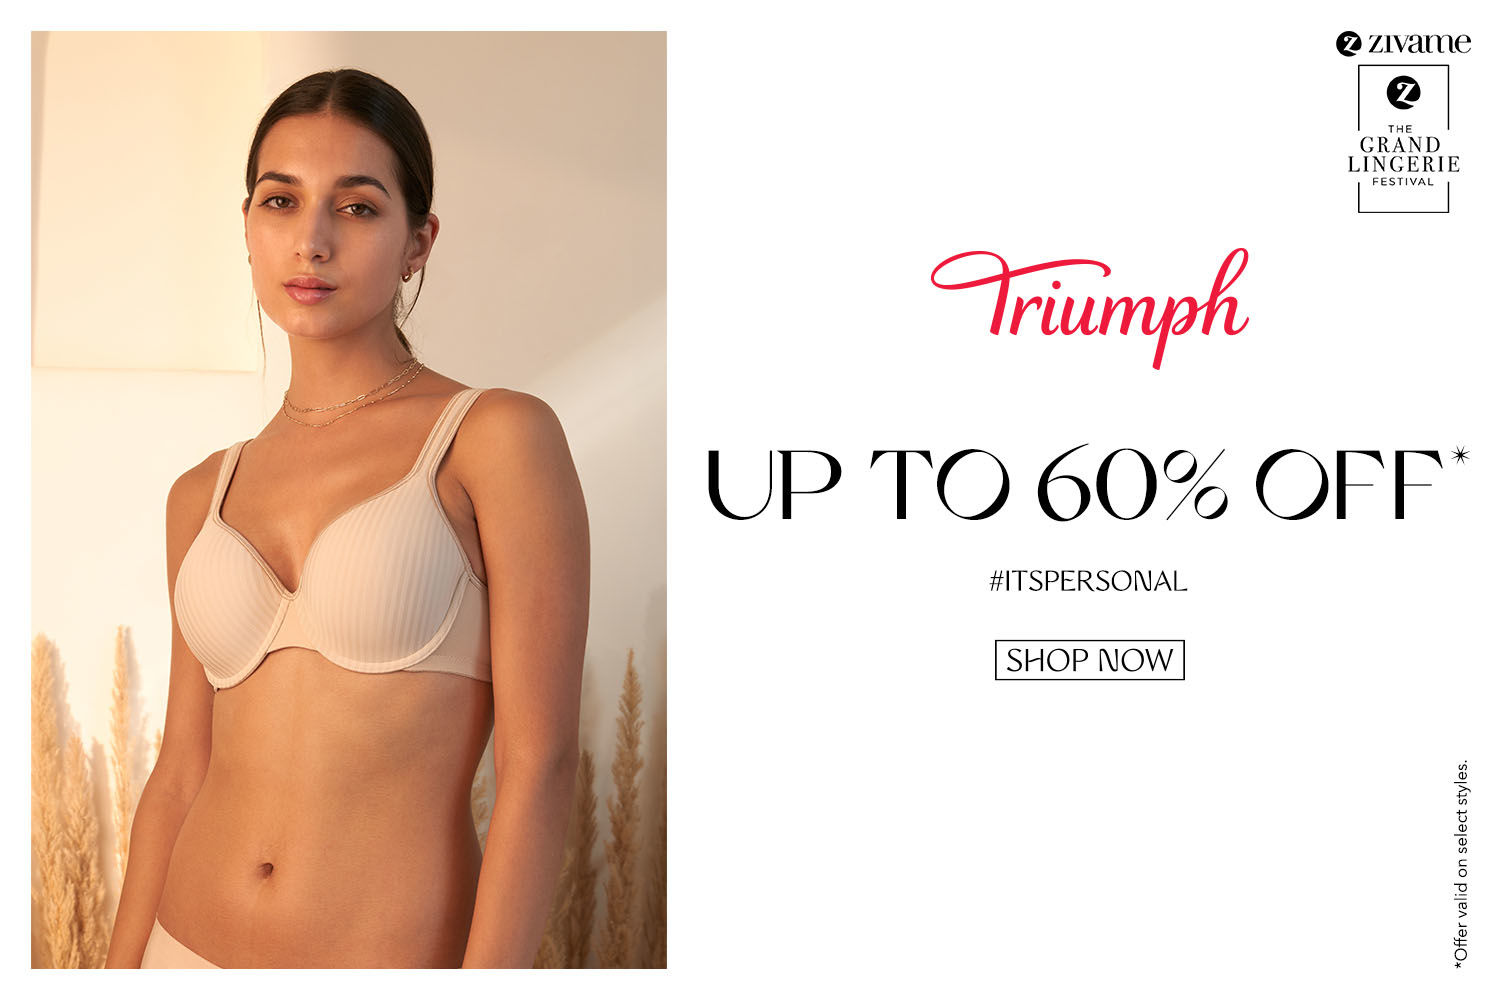 Forever Yours Lingerie sale is running with up to 60% off